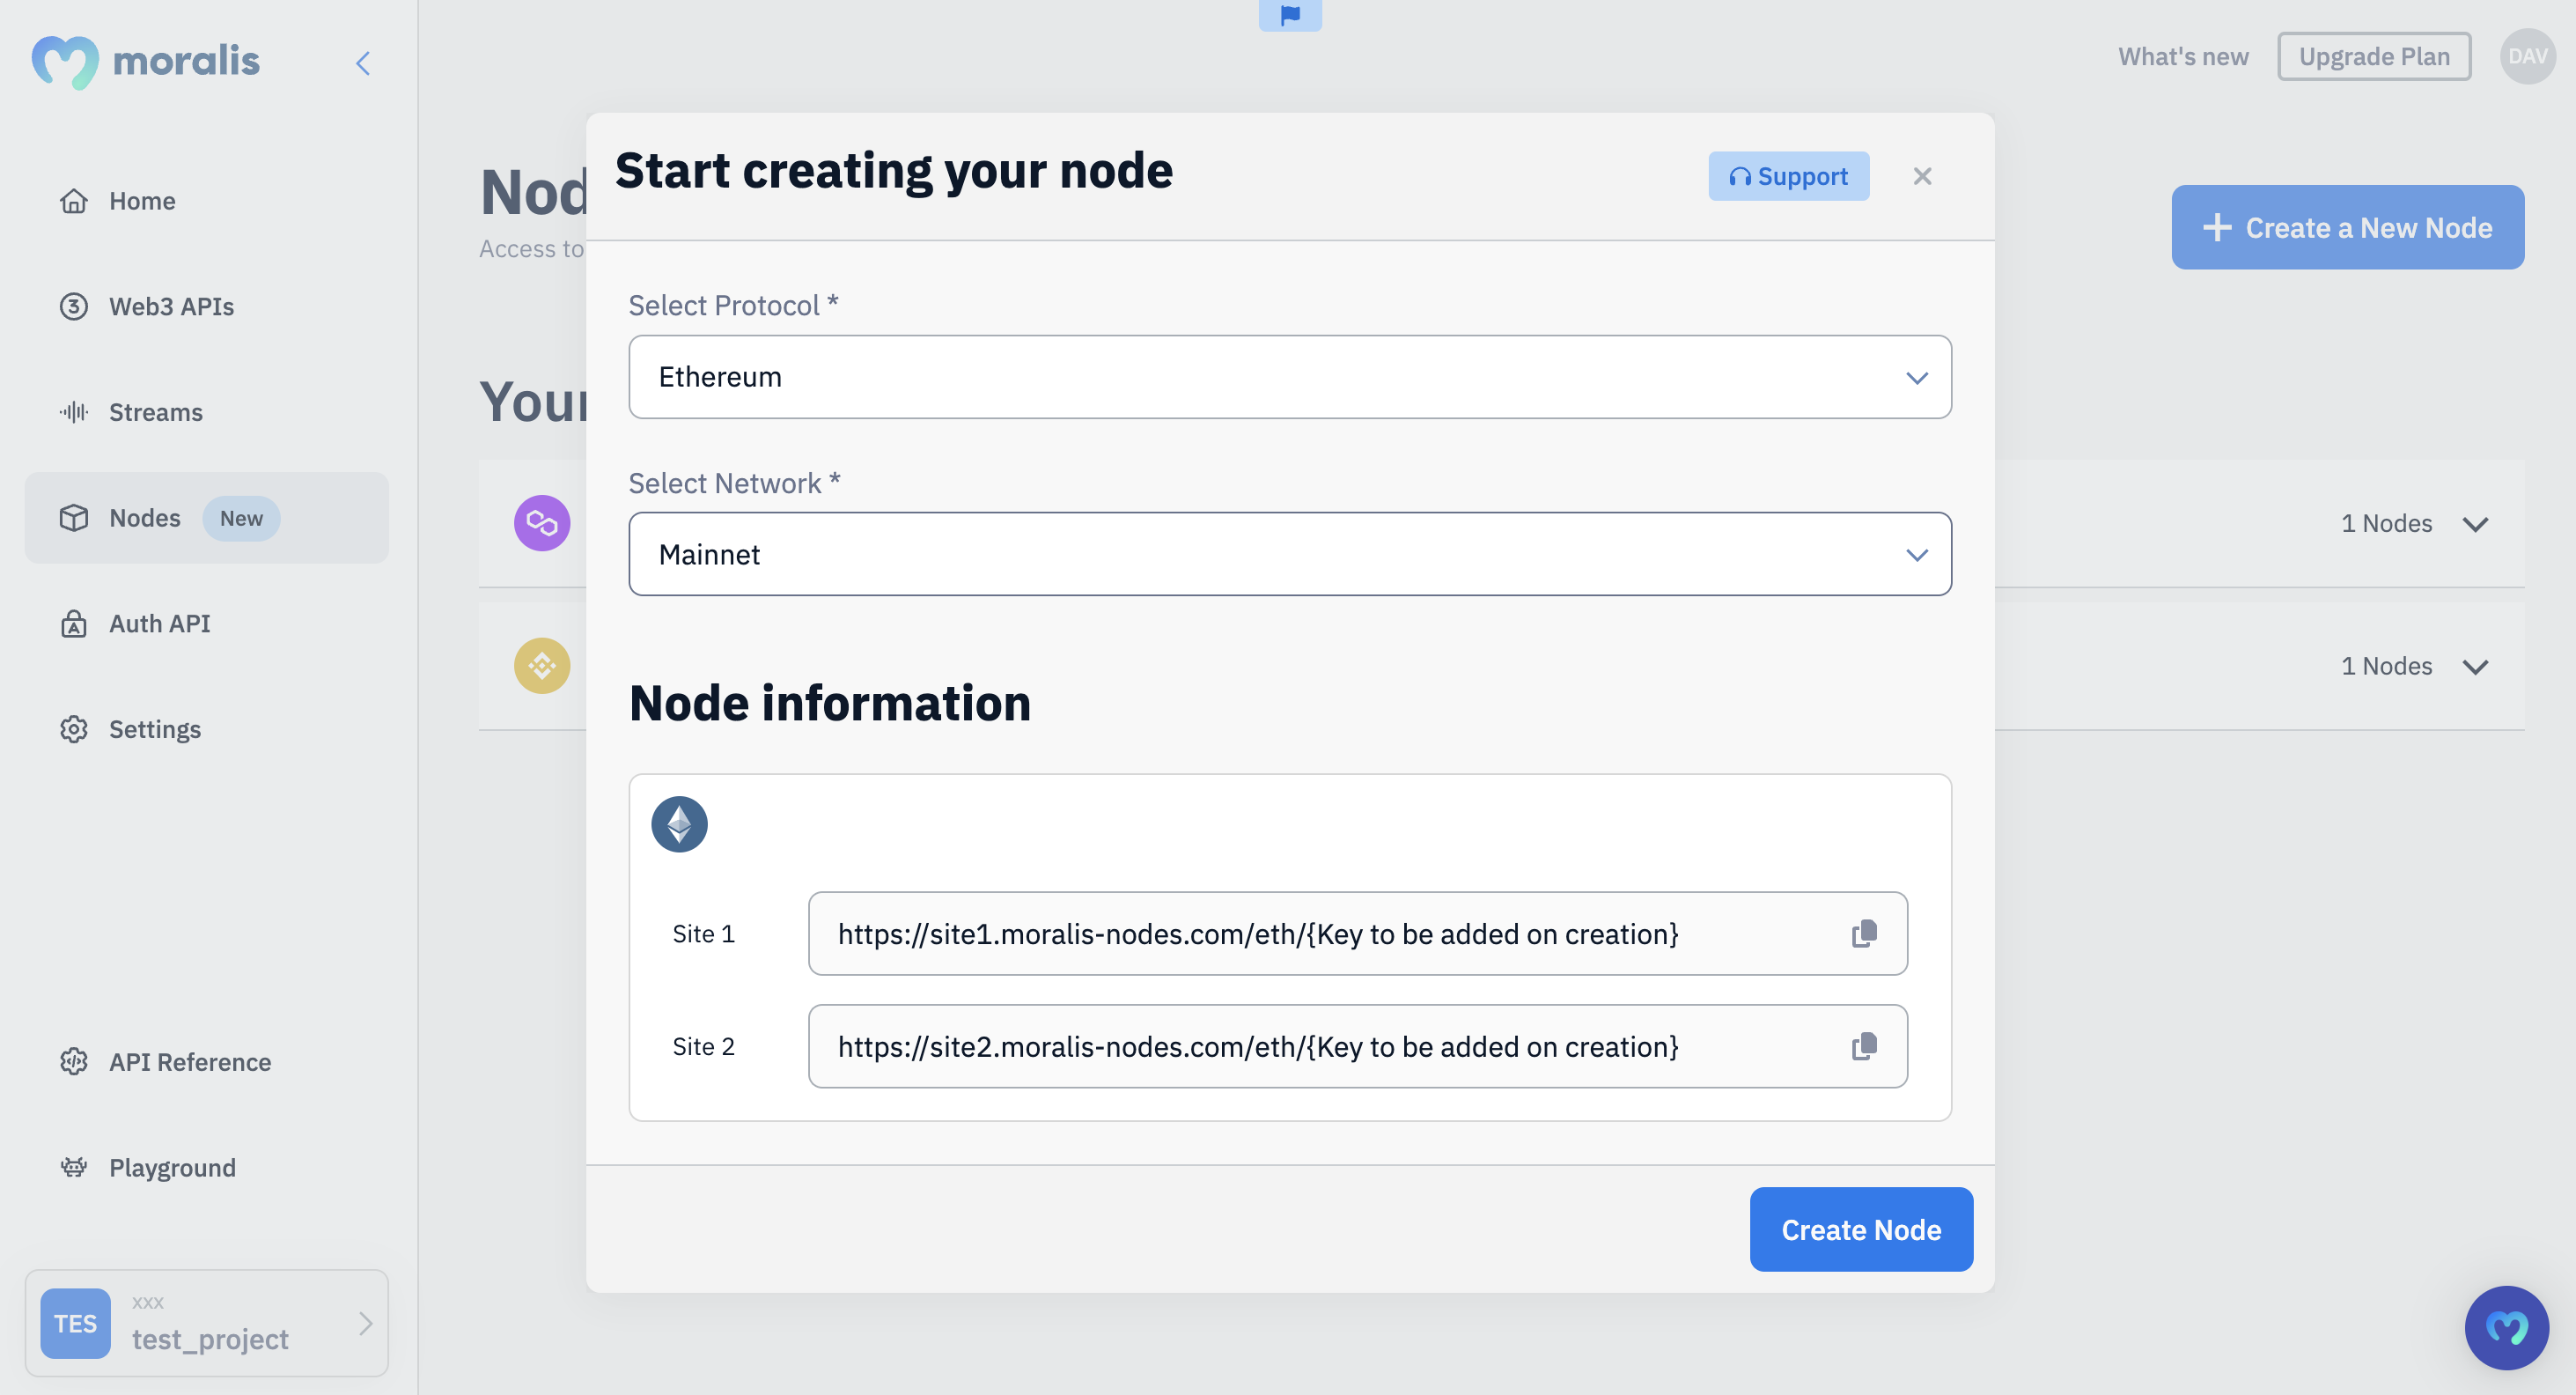 Selecting ”Ethereum” followed by ”Mainnet” and hitting the ”Create Node” button